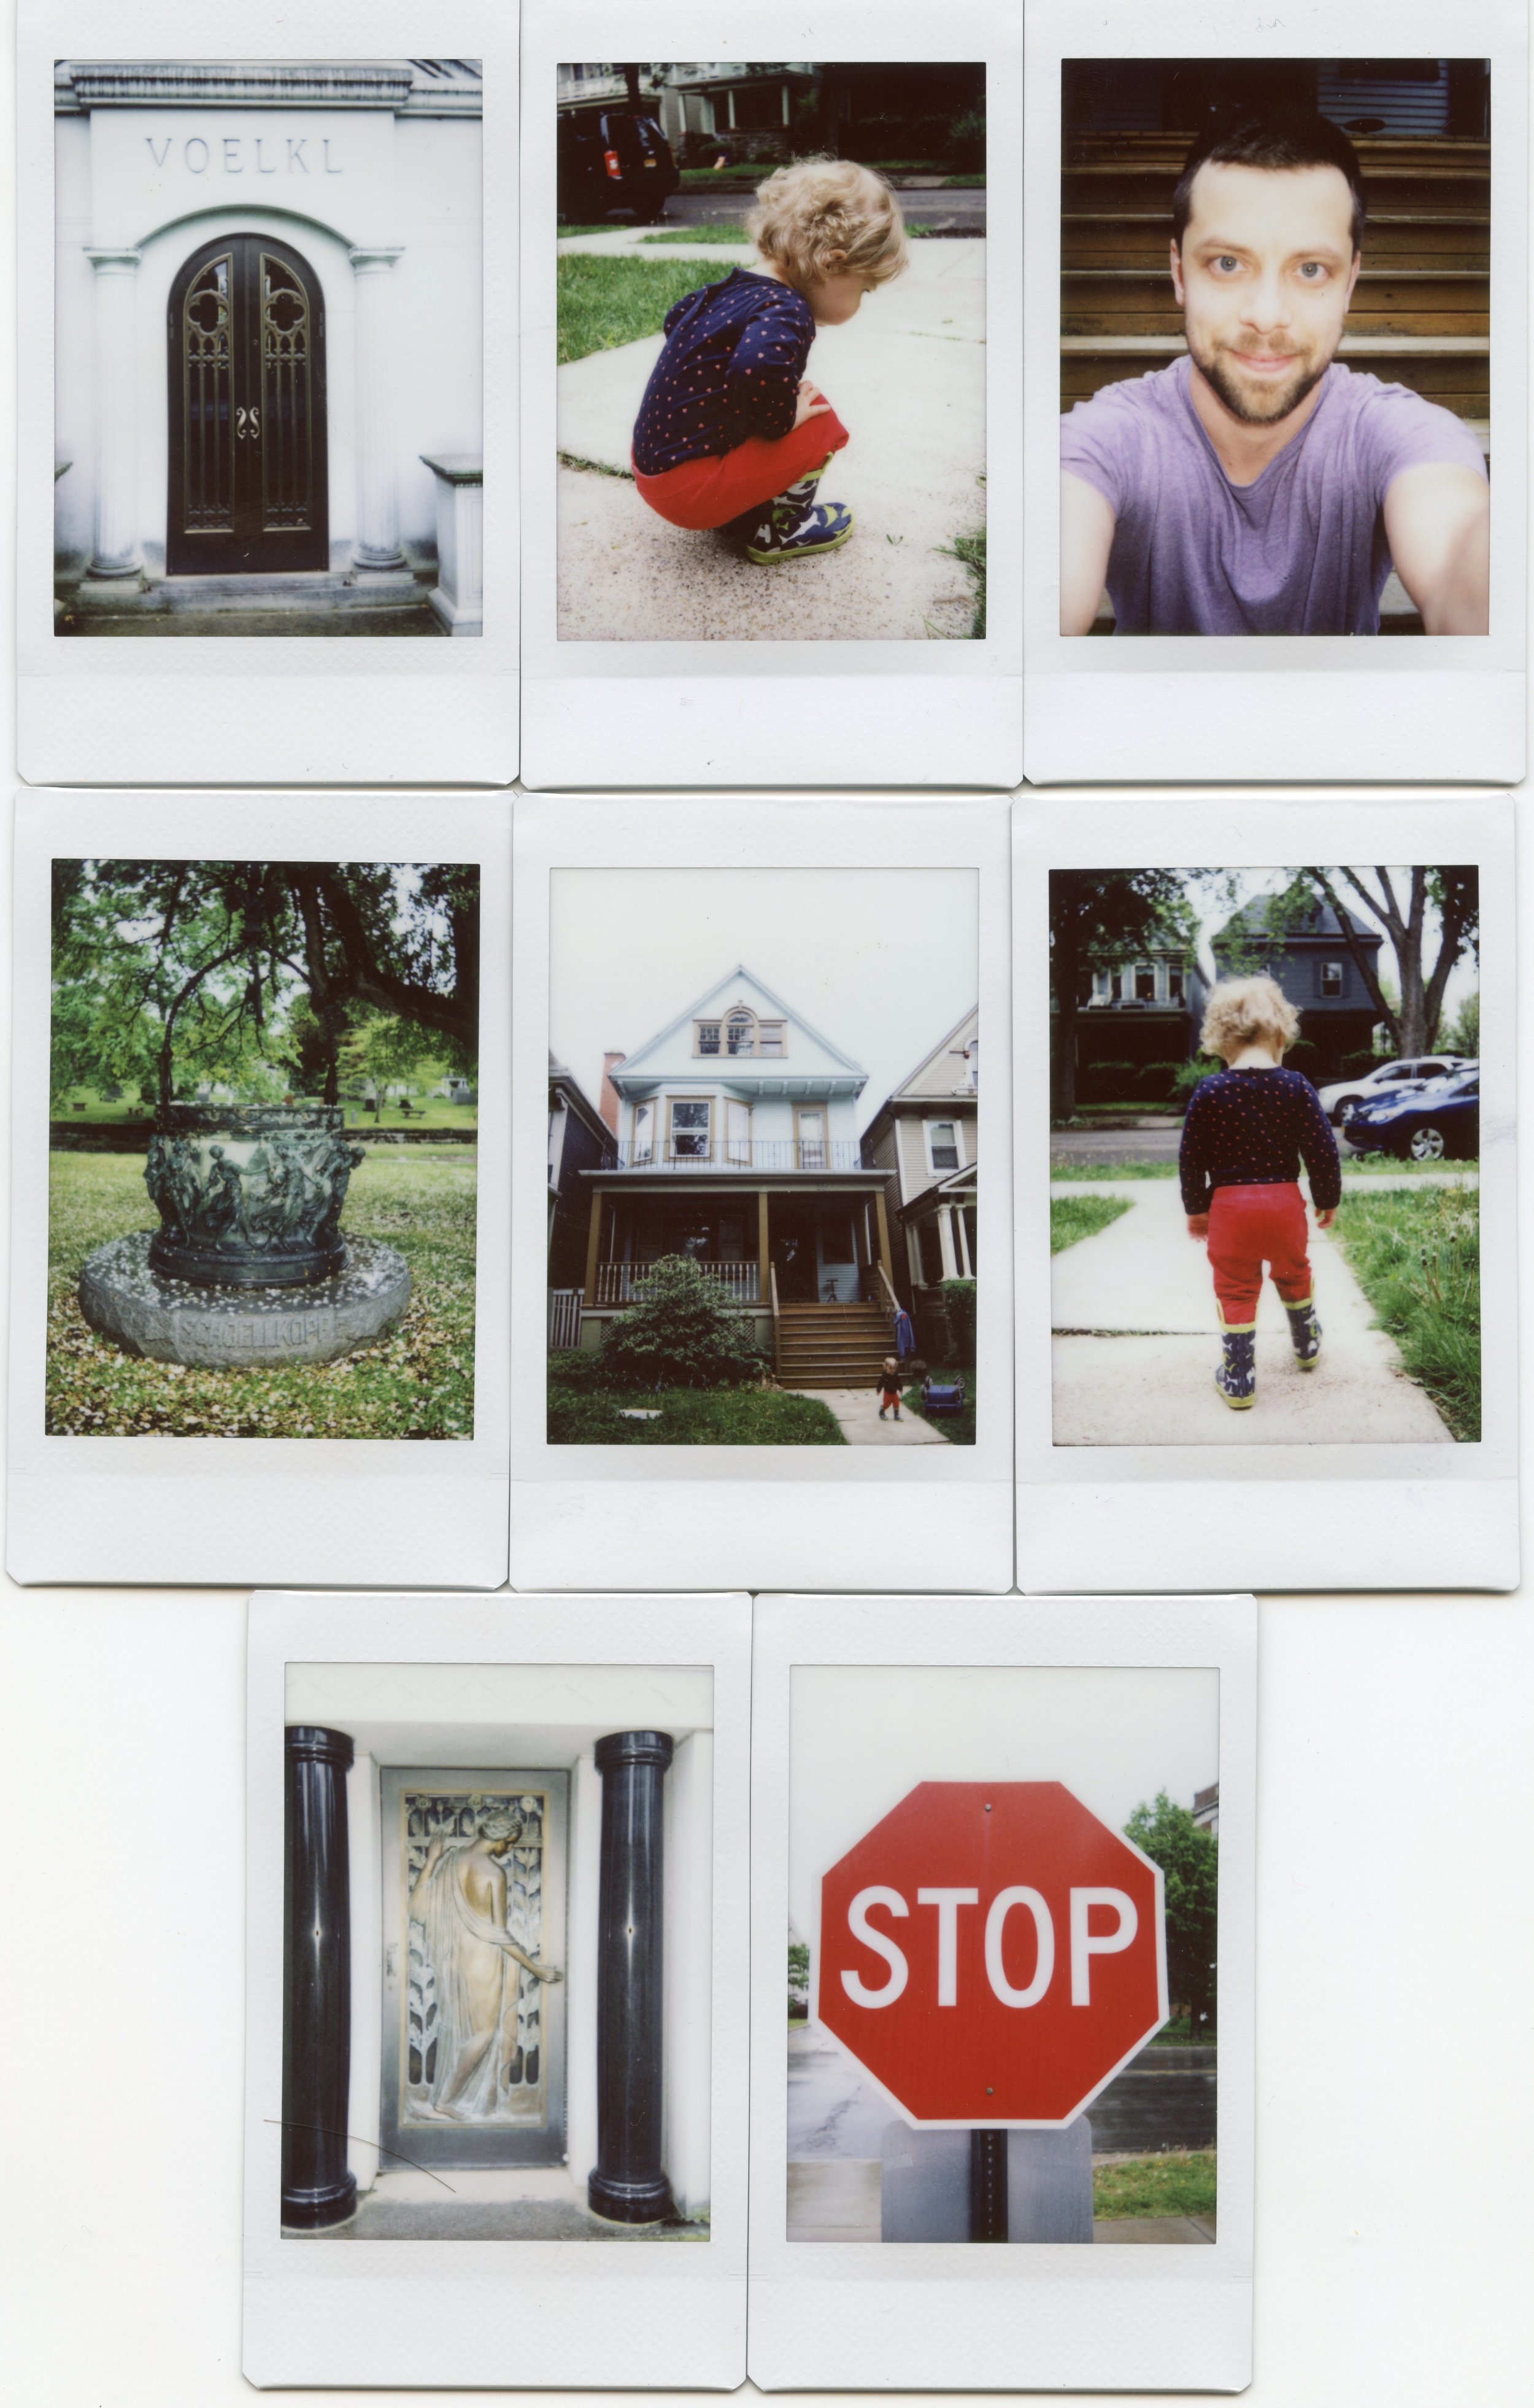 Fuji Instax Mini 50S photos all taken in Auto Mode. Pictures taken mid-day in overcast conditions.